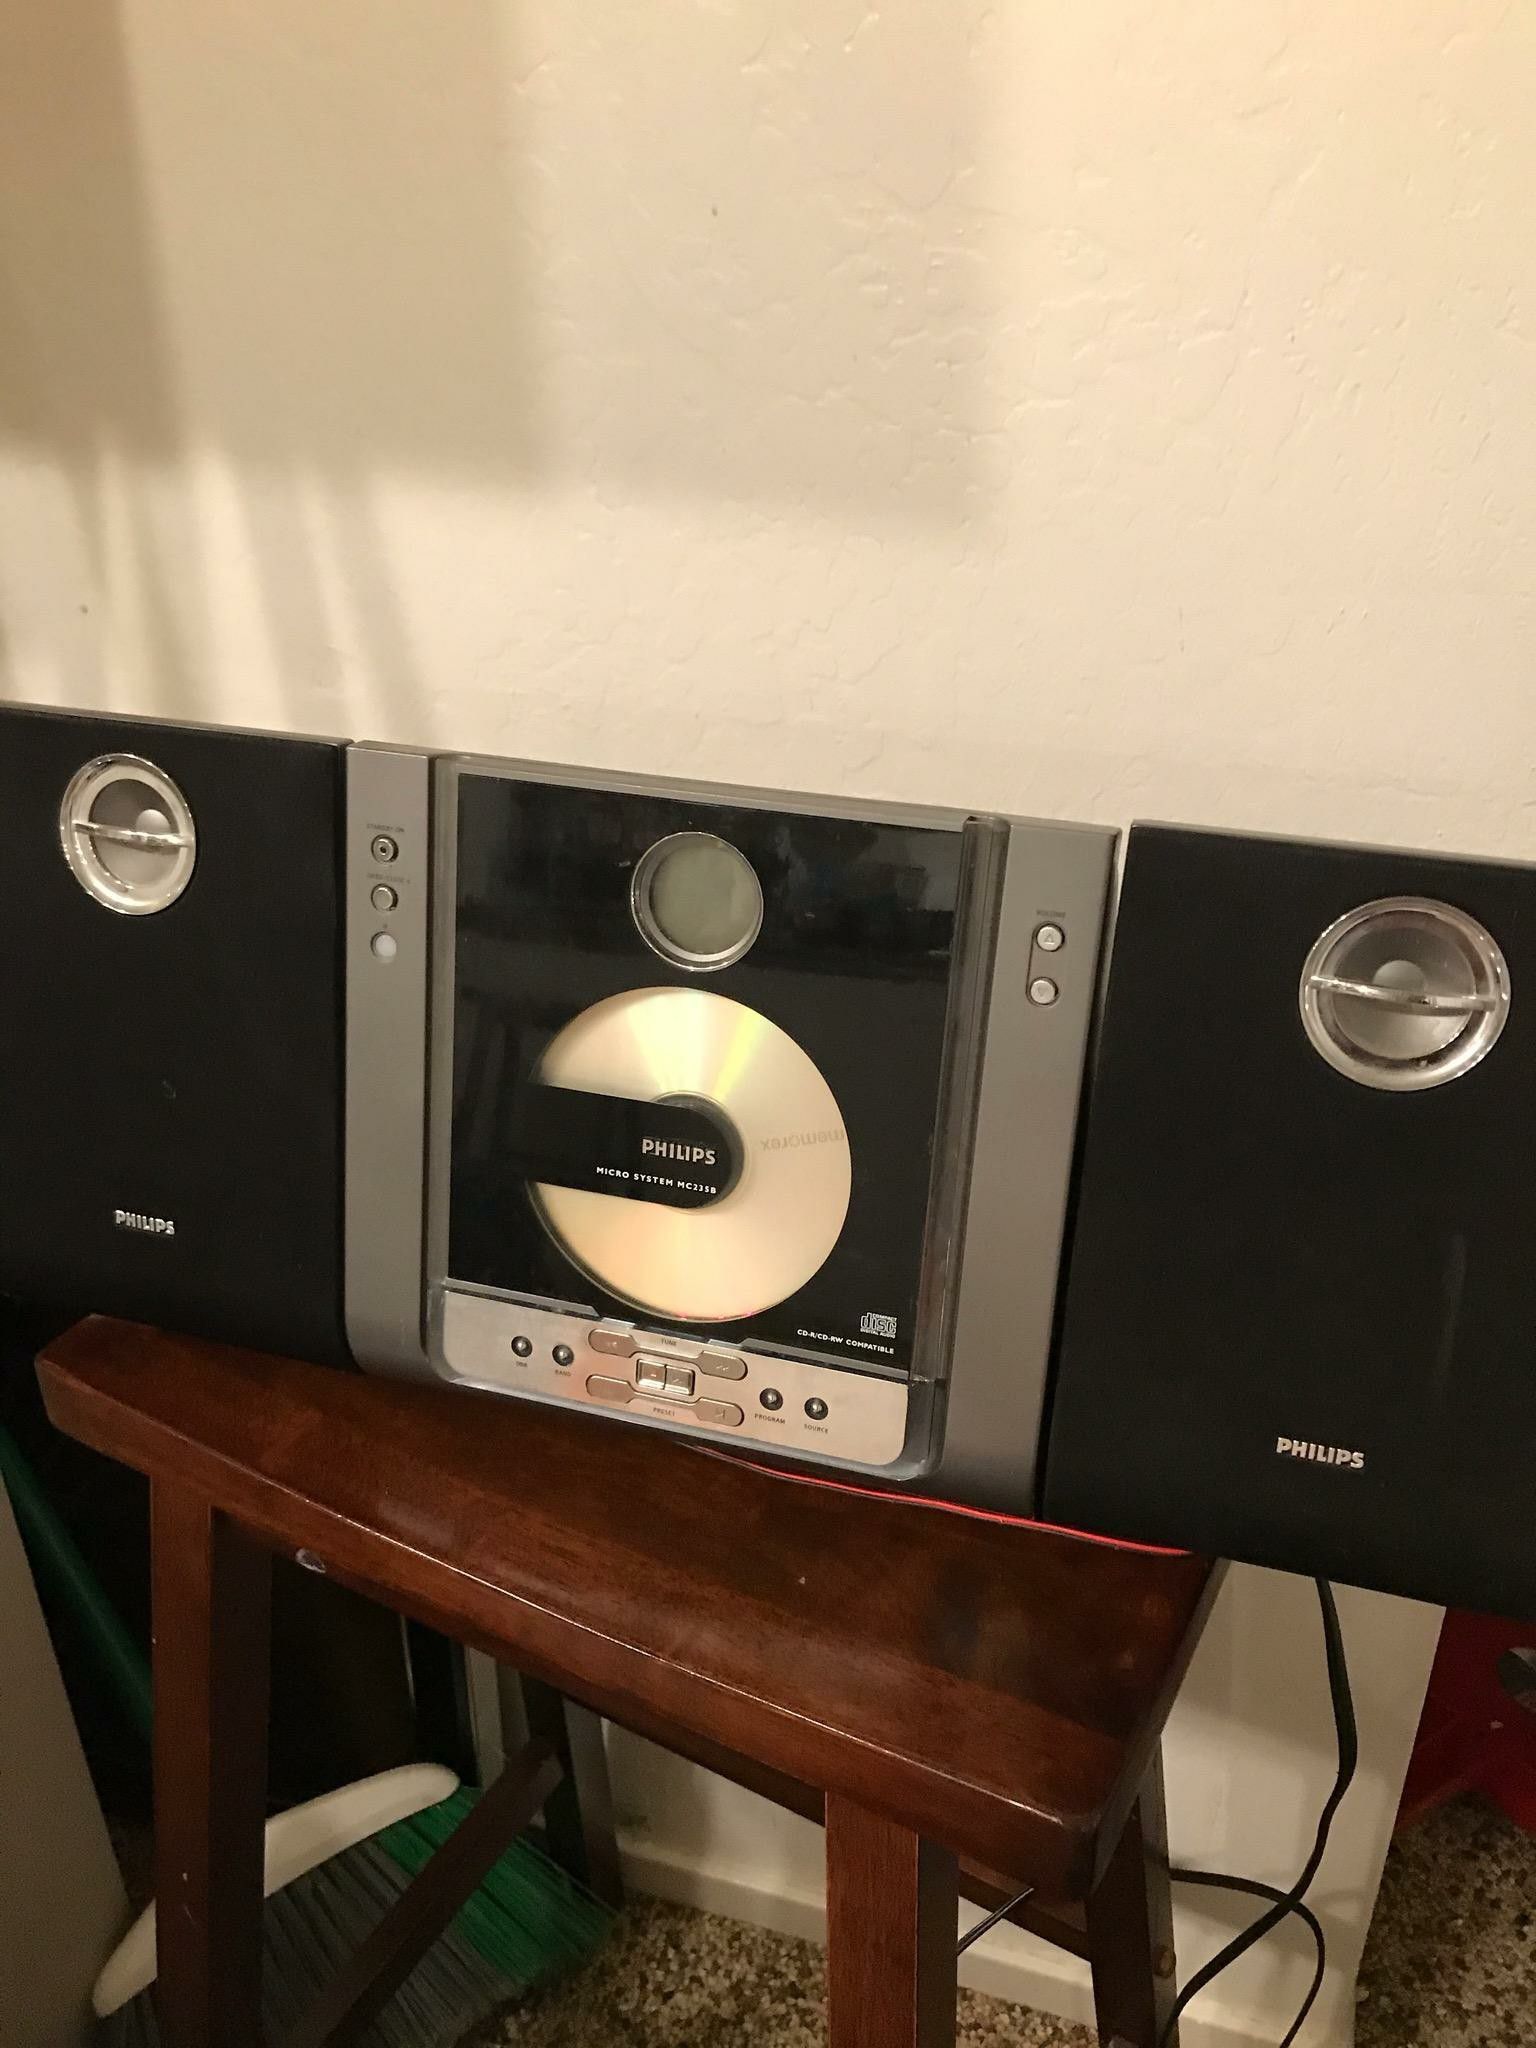 Phillips CD player works $20